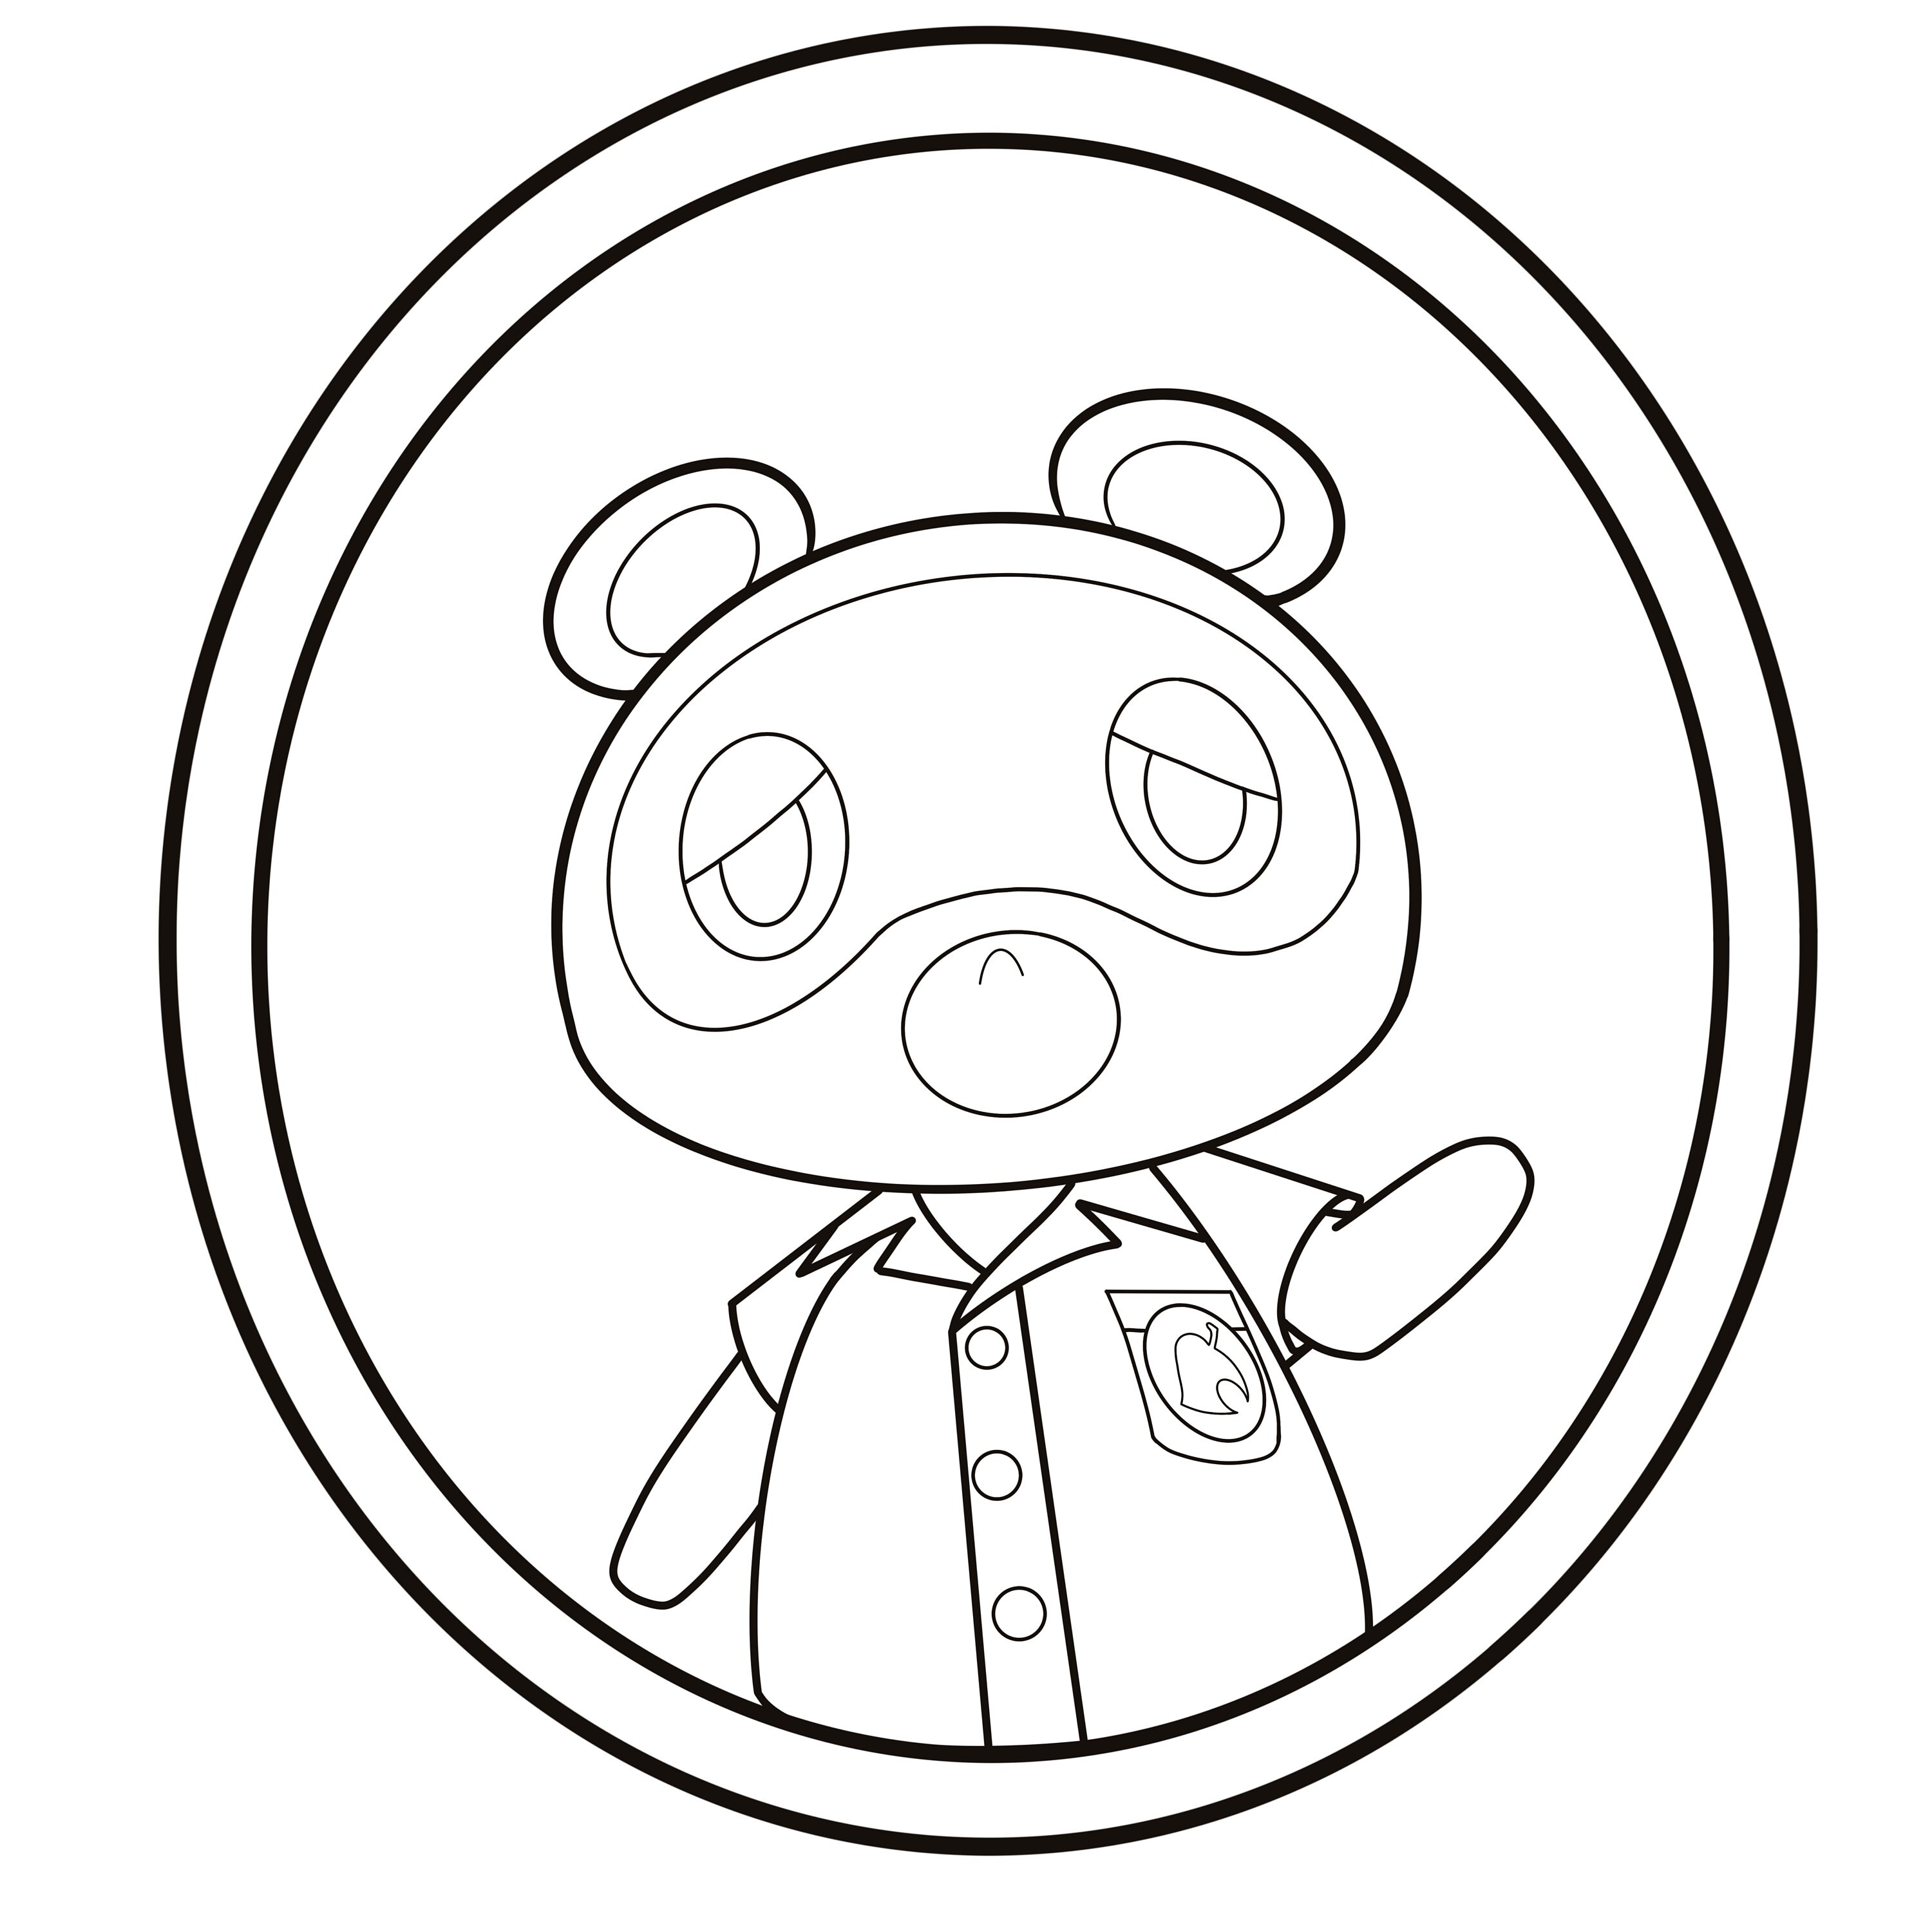 Tom Nook Colouring Page - Etsy